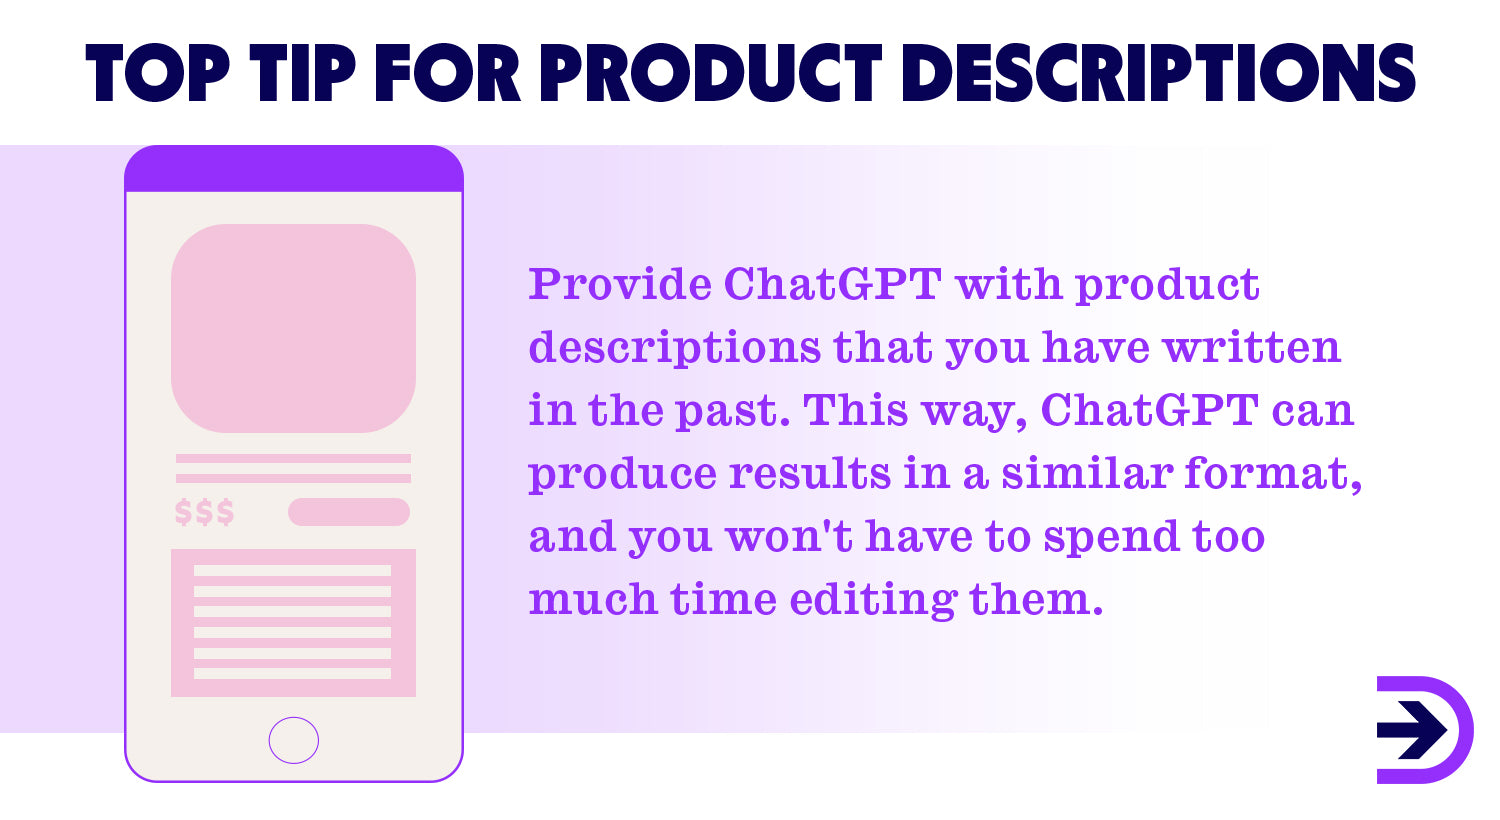 When using ChatGPT to help write product descriptions, it may be helpful to copy and paste examples to the platform.